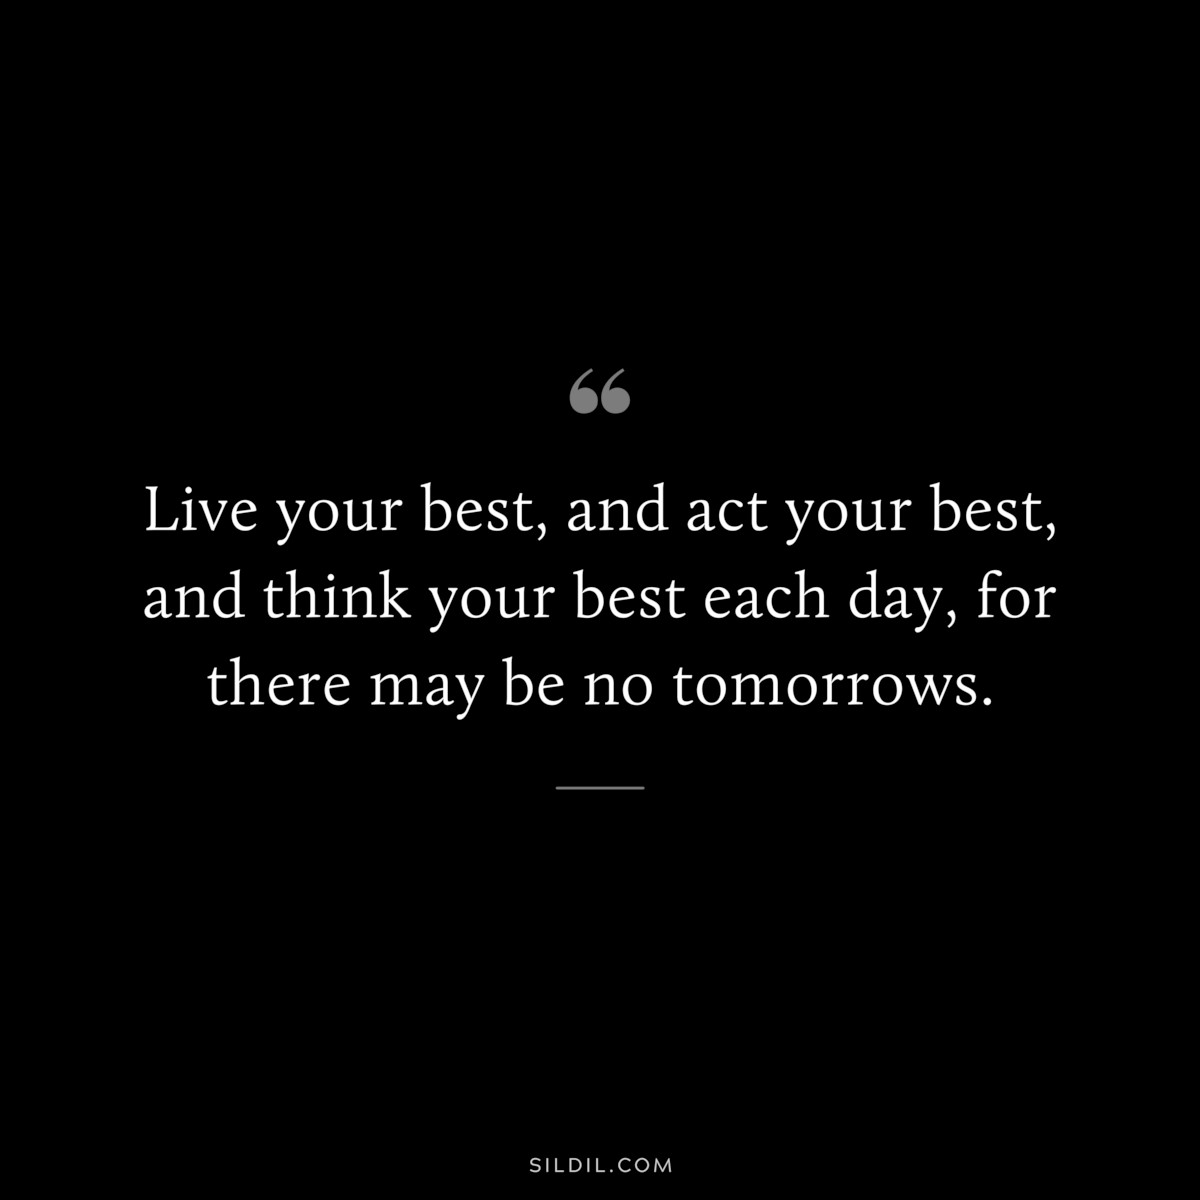 Live your best, and act your best, and think your best each day, for there may be no tomorrows.